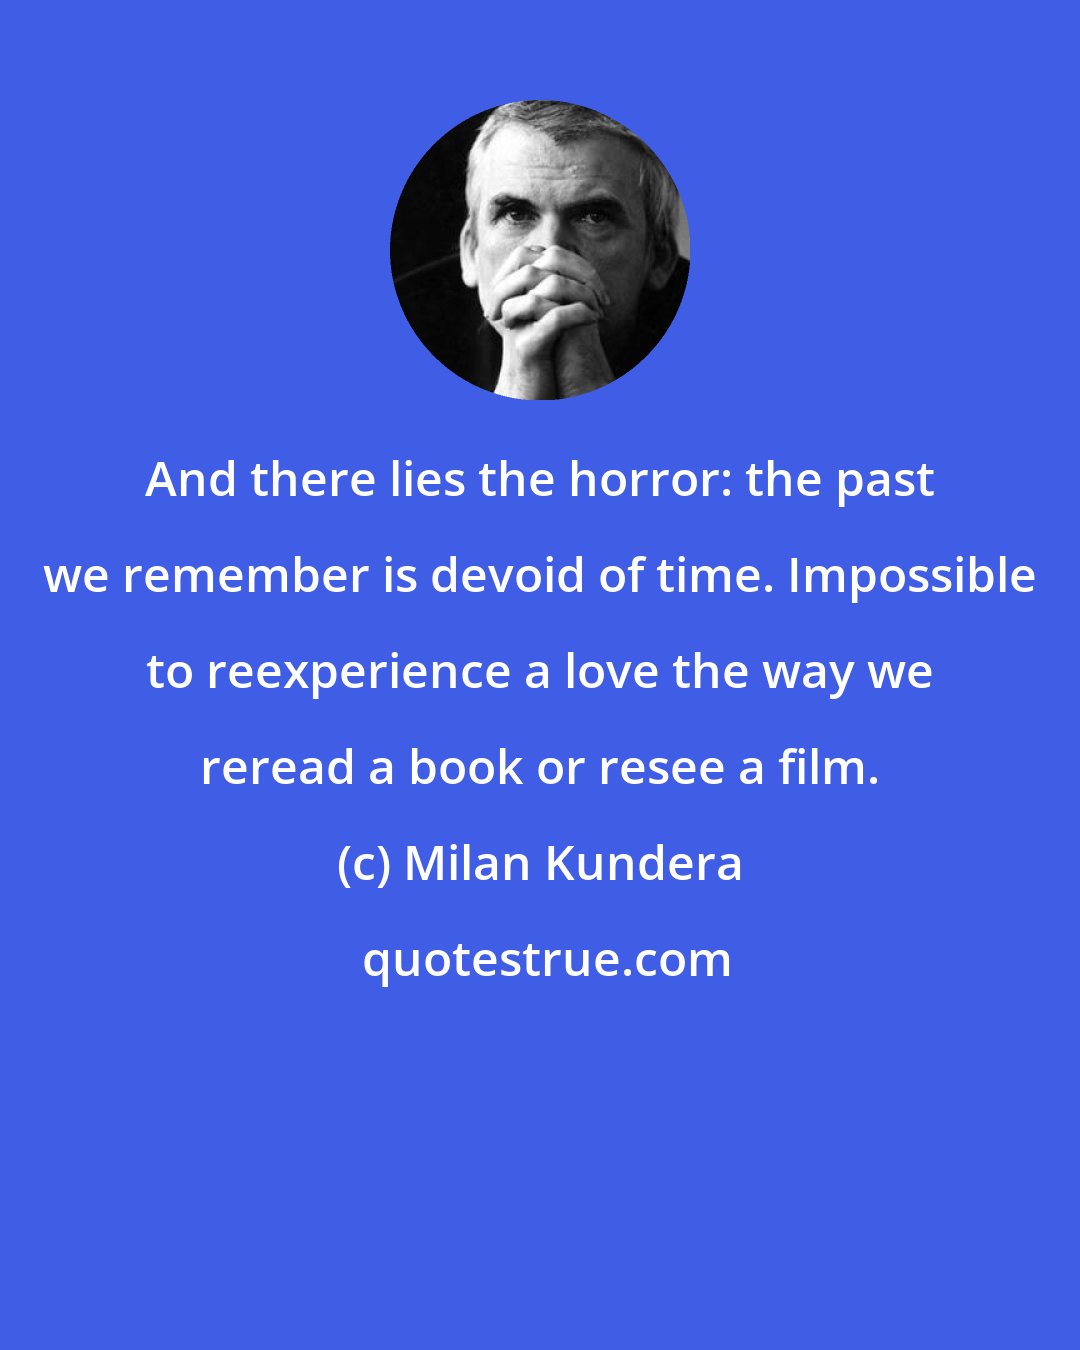 Milan Kundera: And there lies the horror: the past we remember is devoid of time. Impossible to reexperience a love the way we reread a book or resee a film.